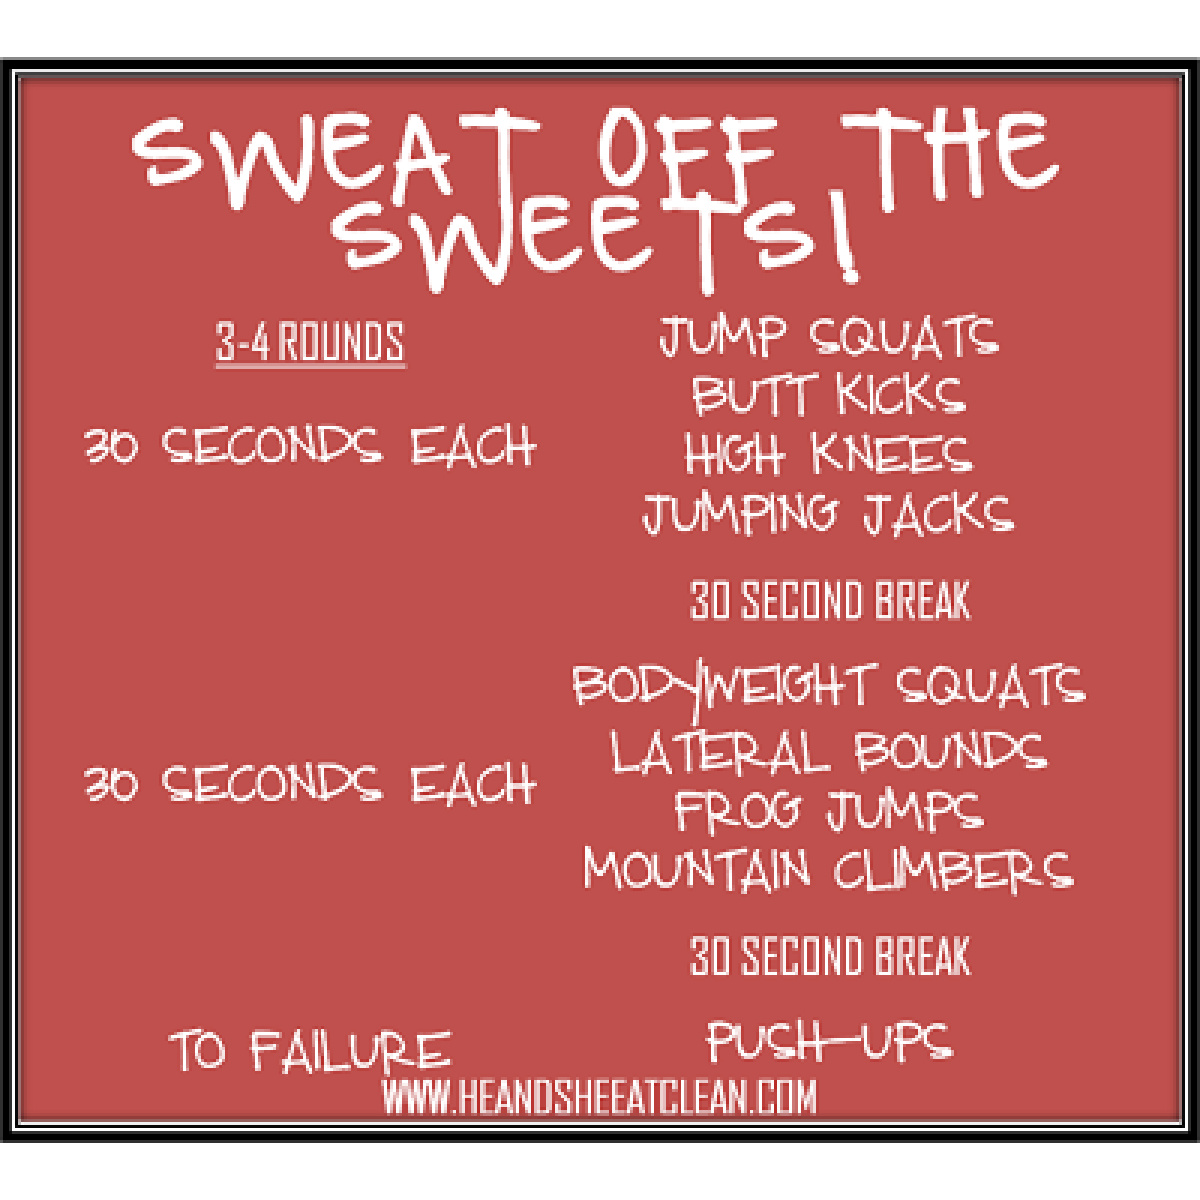 Sweat off the sweets workout